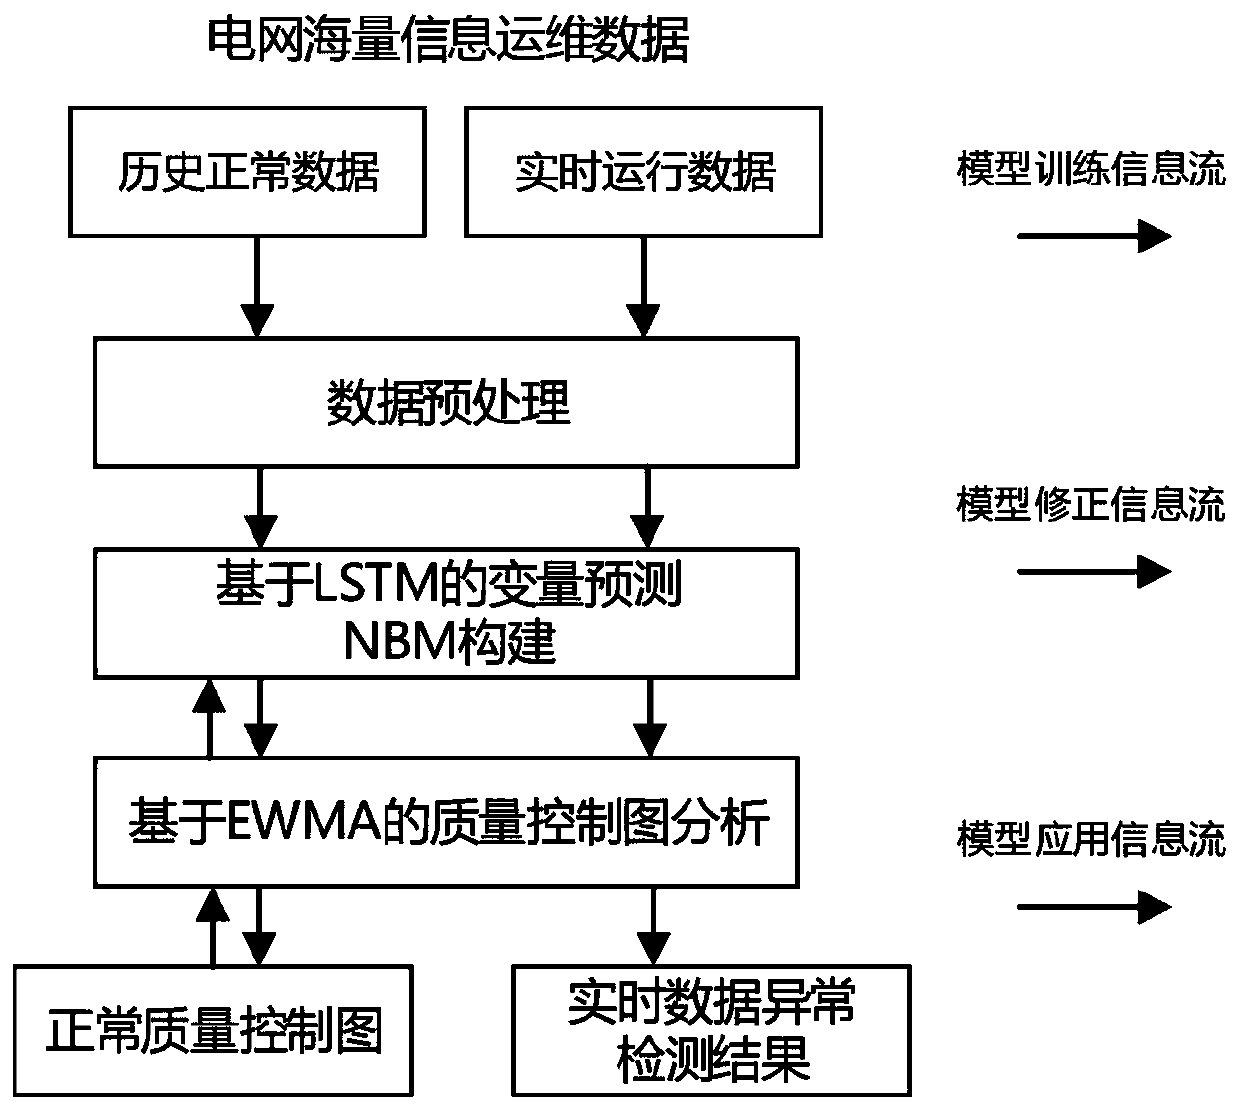 Power grid information operation and maintenance monitoring method based on deep learning